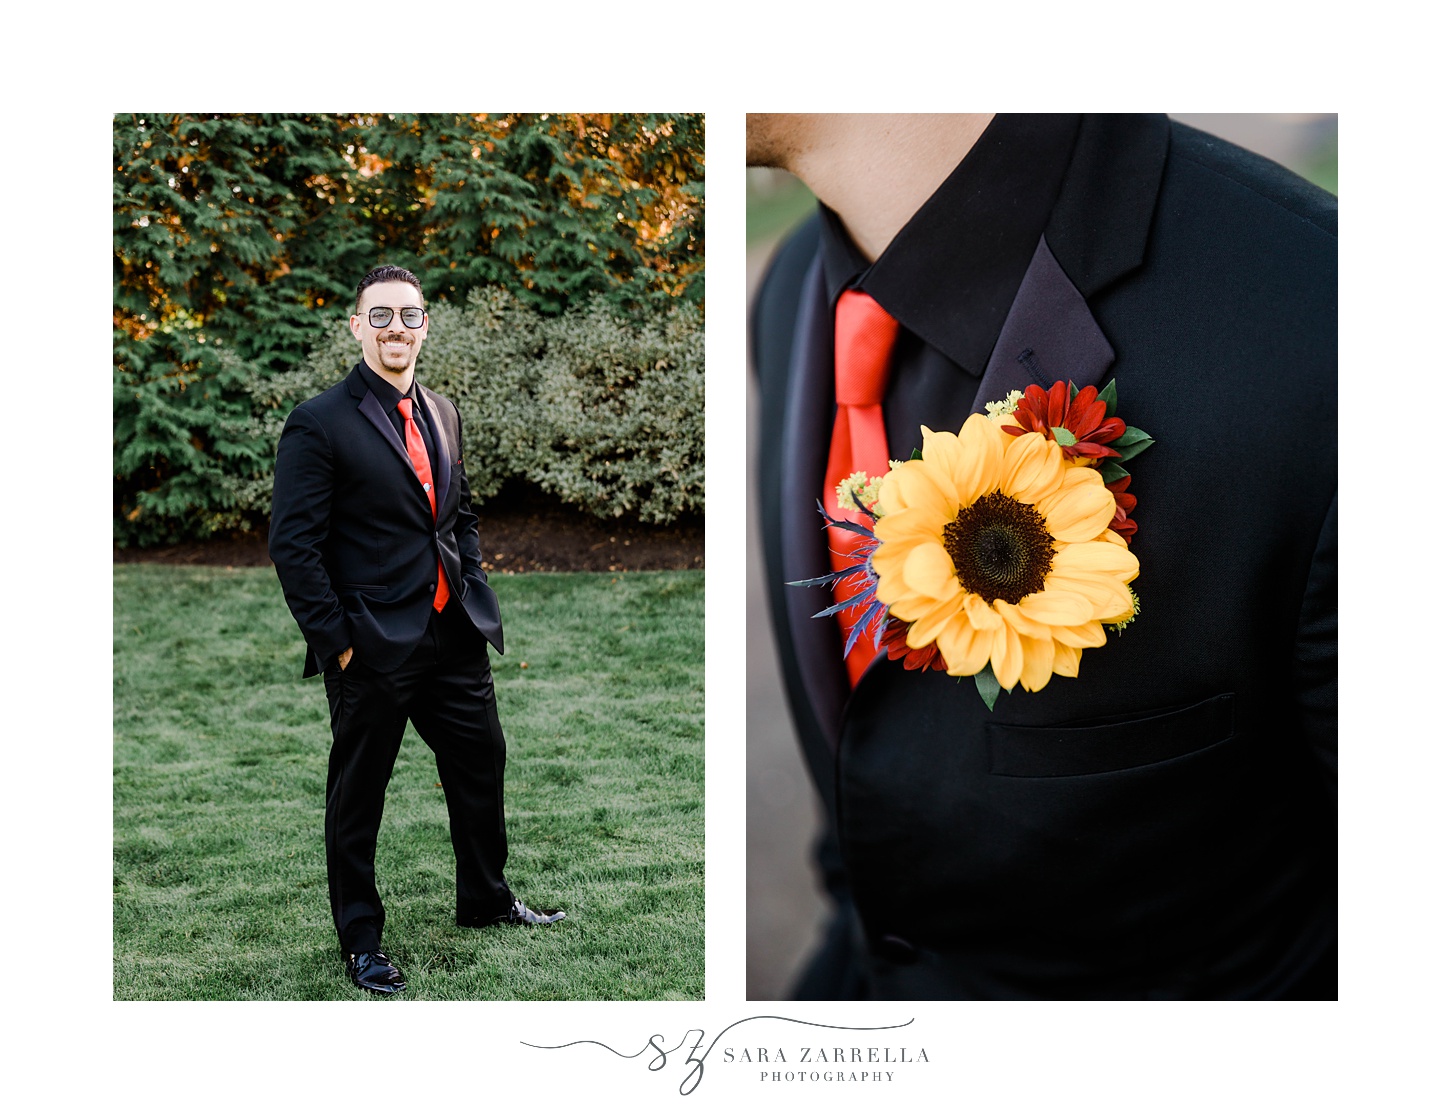 groom in black suit with sunflower boutonniere and Tony Stark inspired sunglasses 